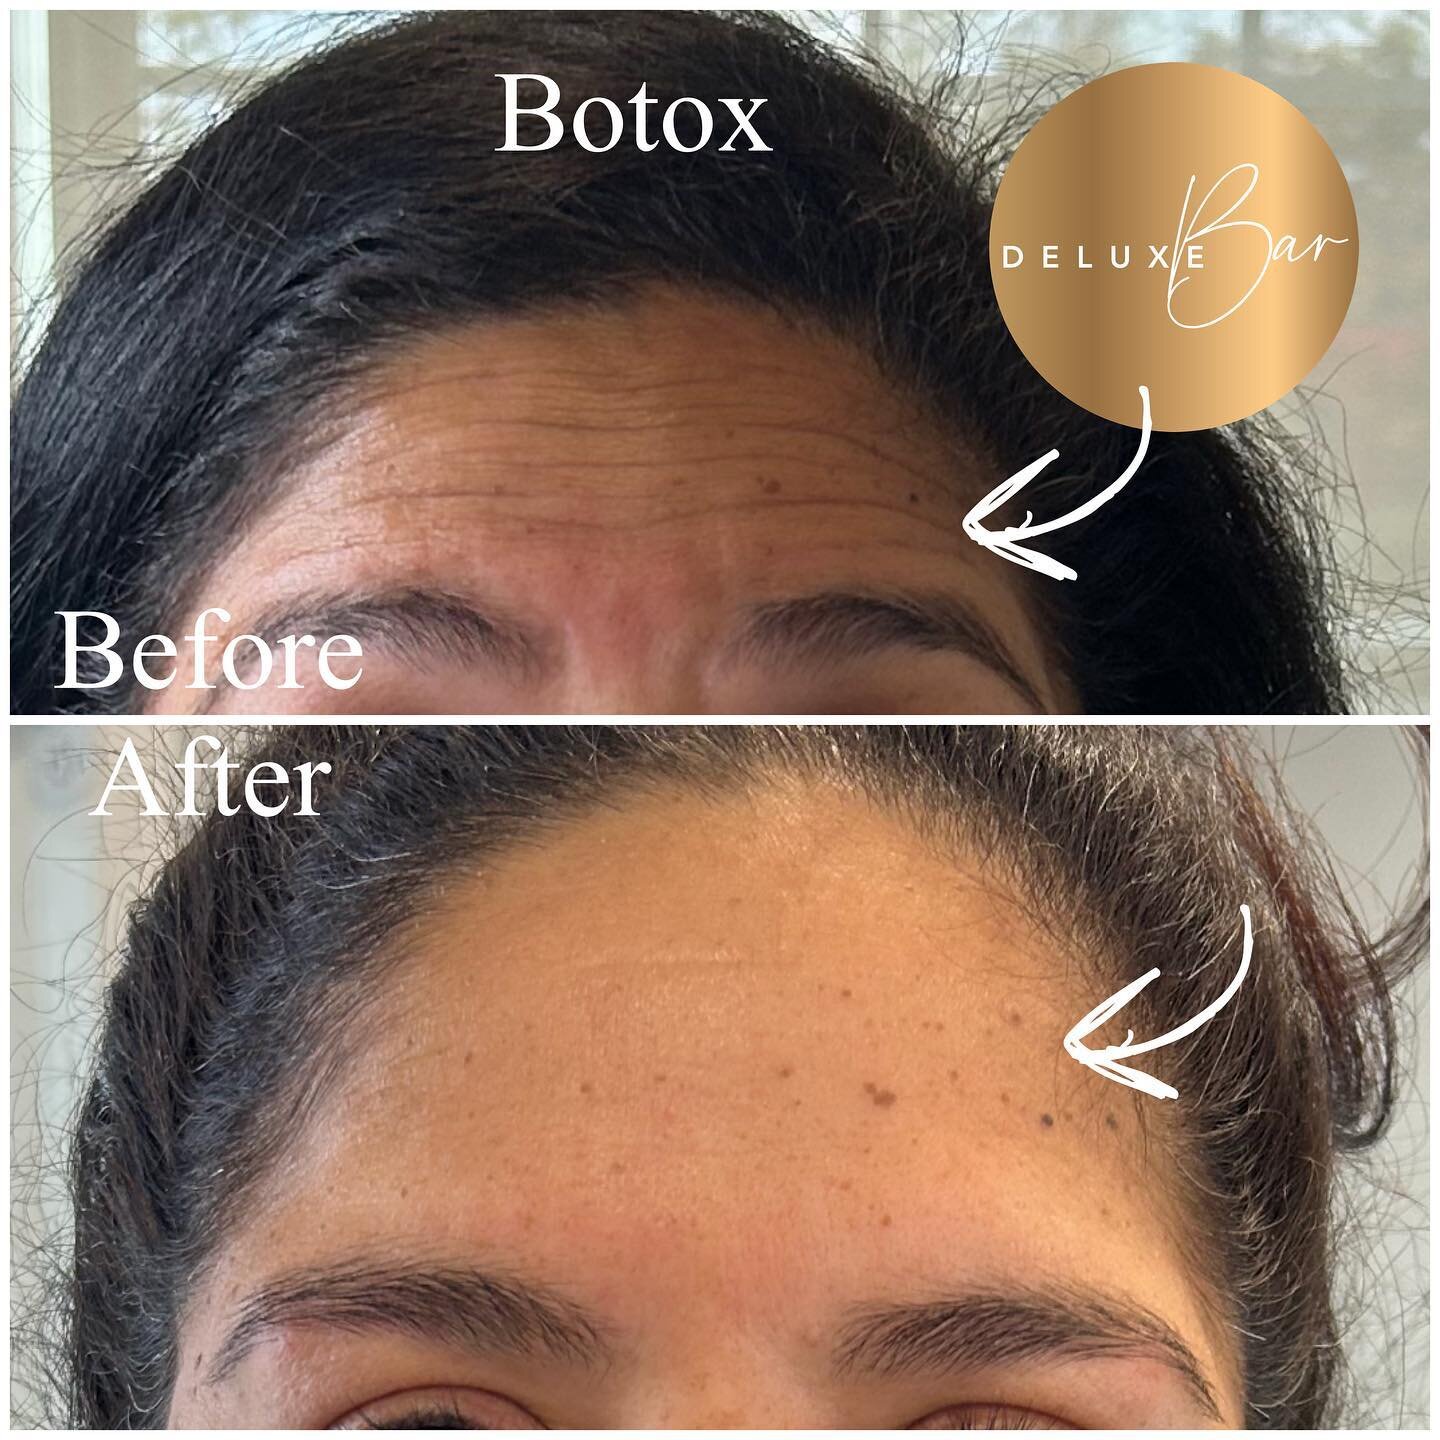 We are in a serious relationship with Botox. Glowing over these gorgeous results of Botox treatment to the frown lines and forehead ✨ 

There is still time to get in before the Holiday rush!  Call 781-561-0076 or book online thedeluxebar.com